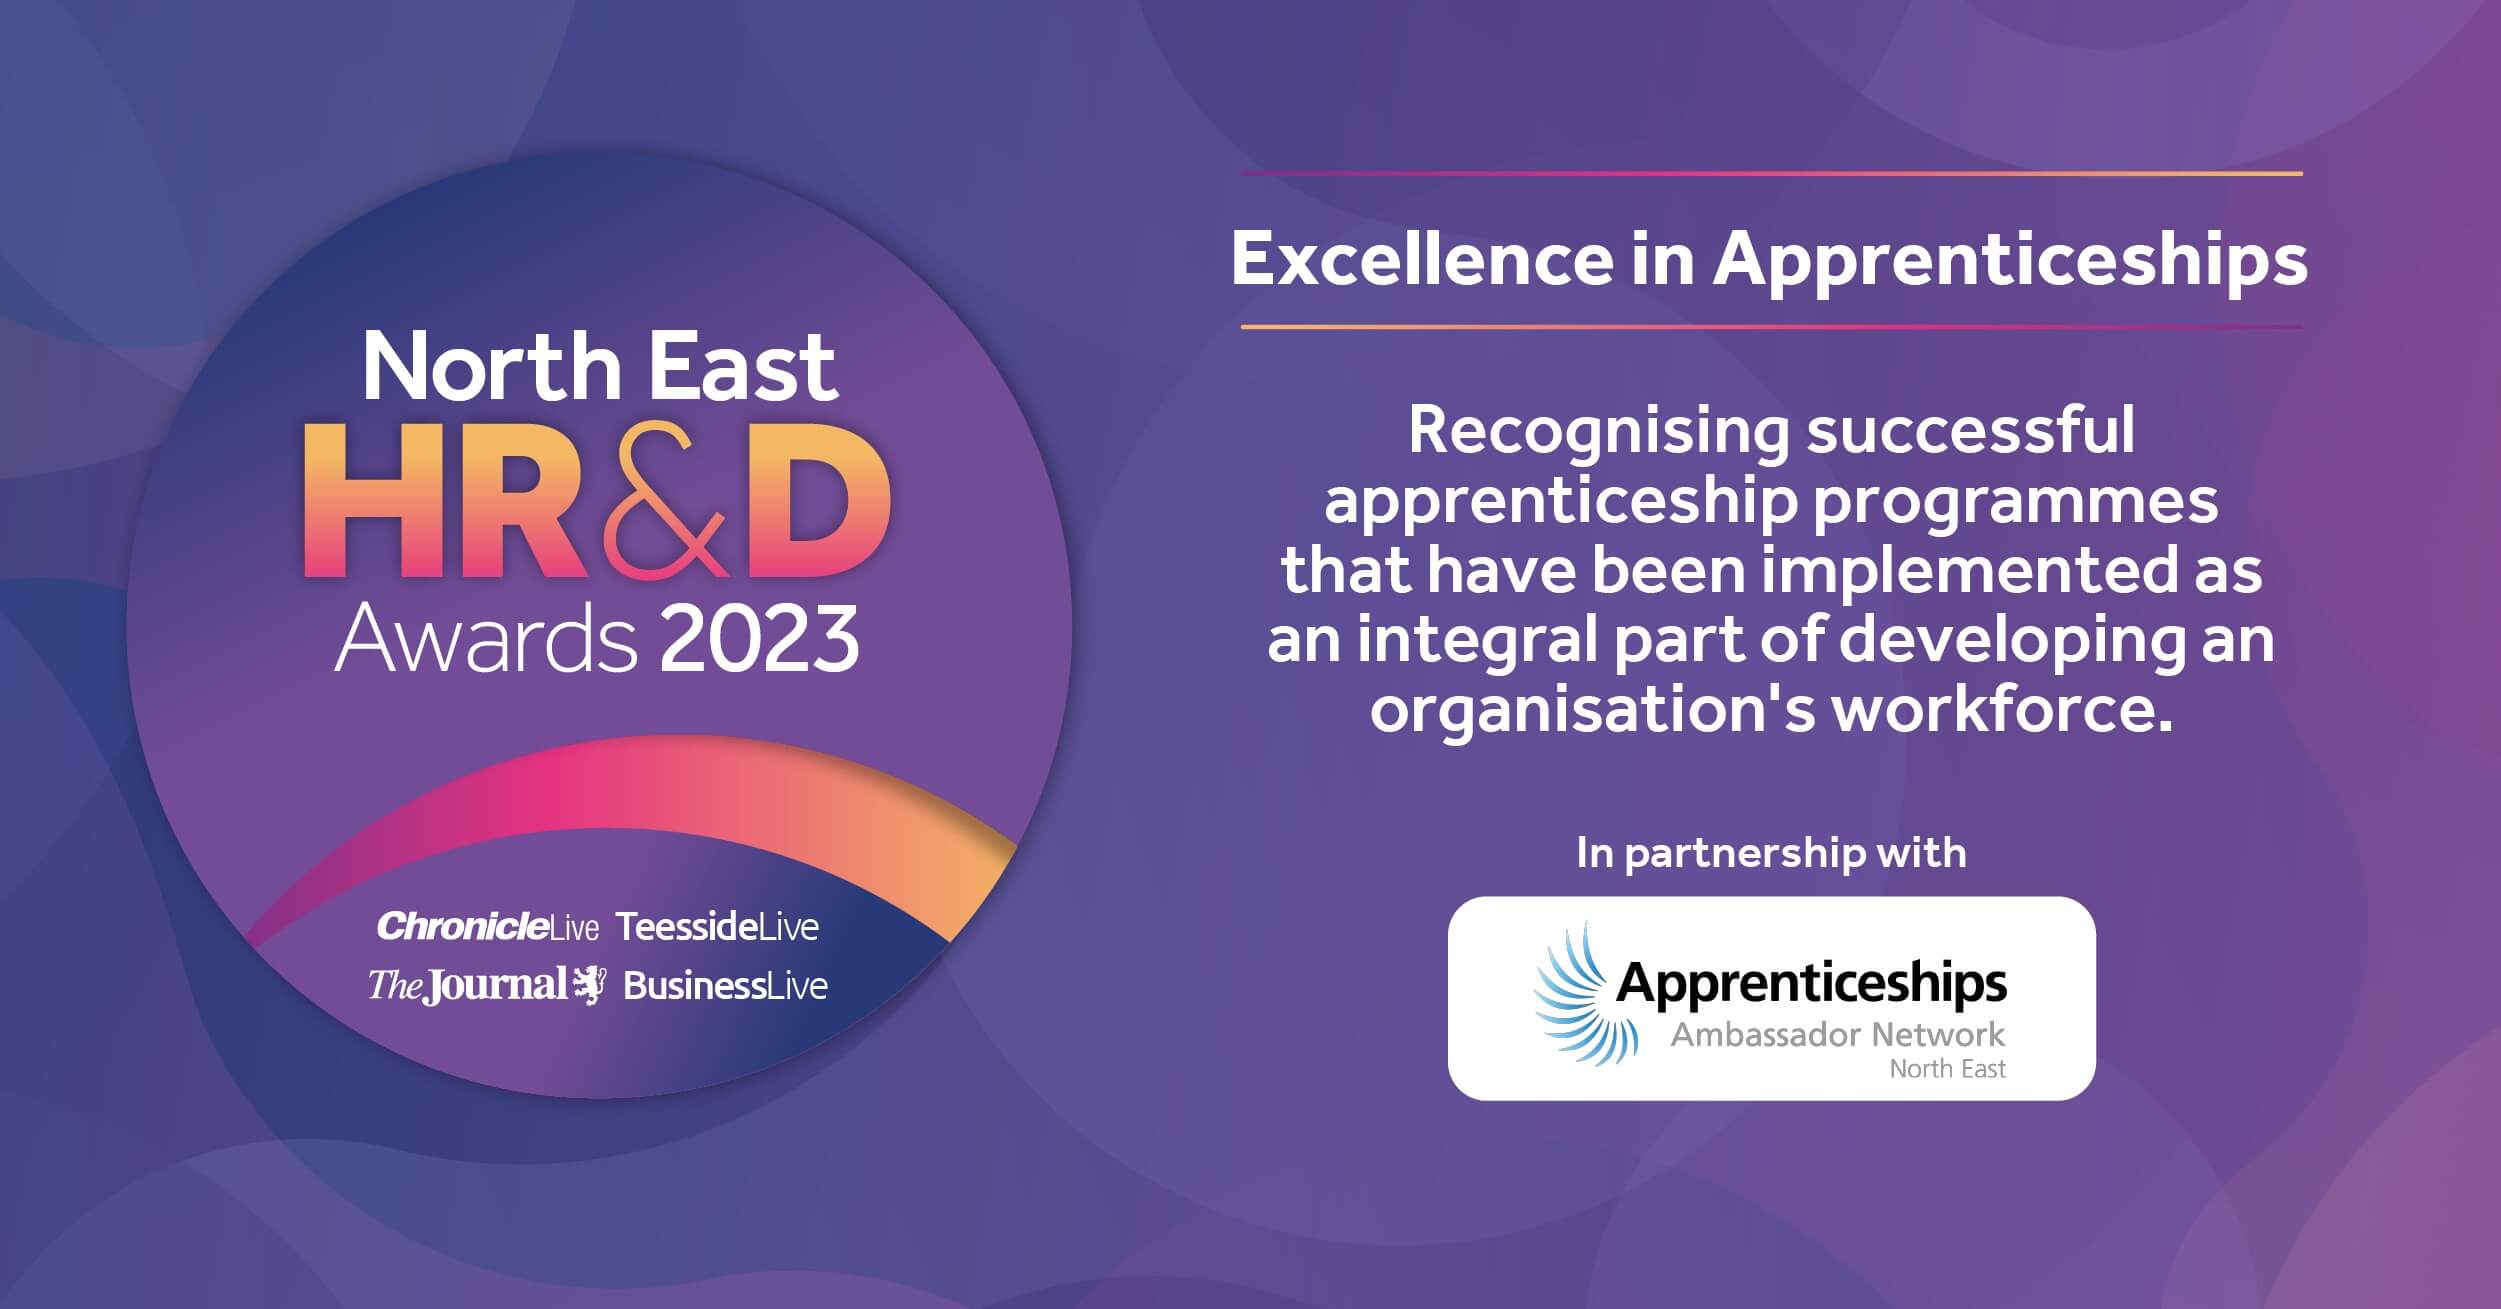 Excellence in Apprenticeships